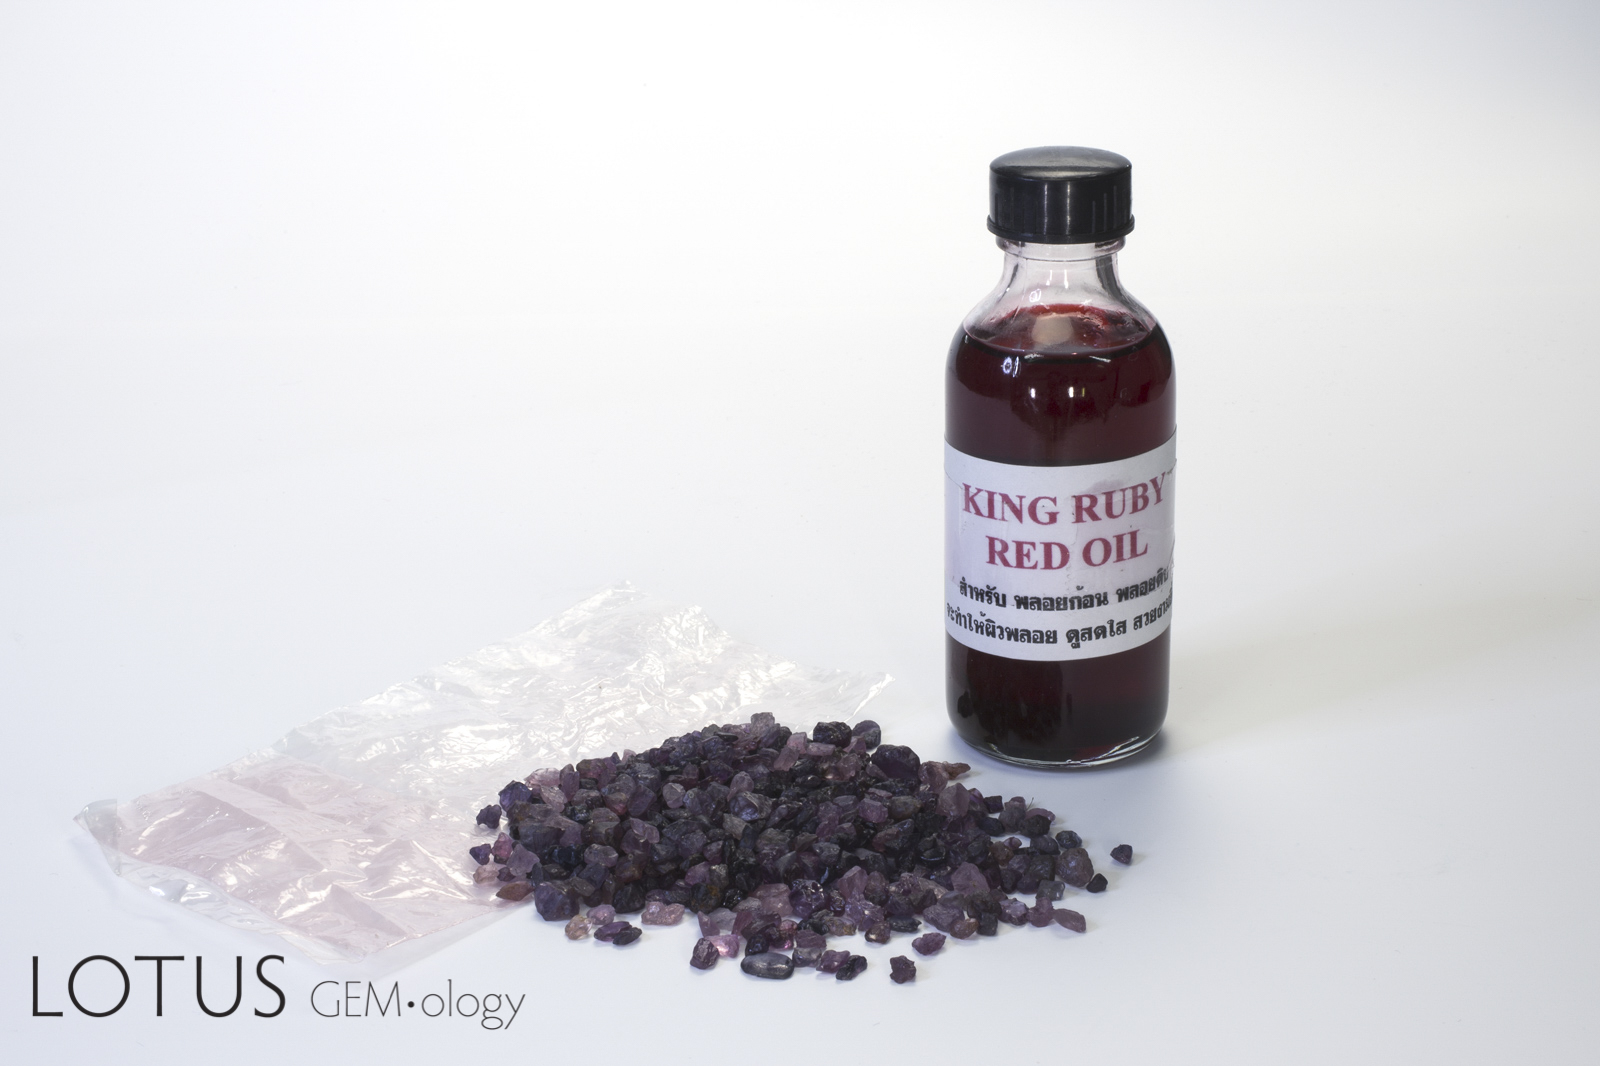 "King Ruby Red Oil," a type of oil sold in Chanthaburi, Thailand.